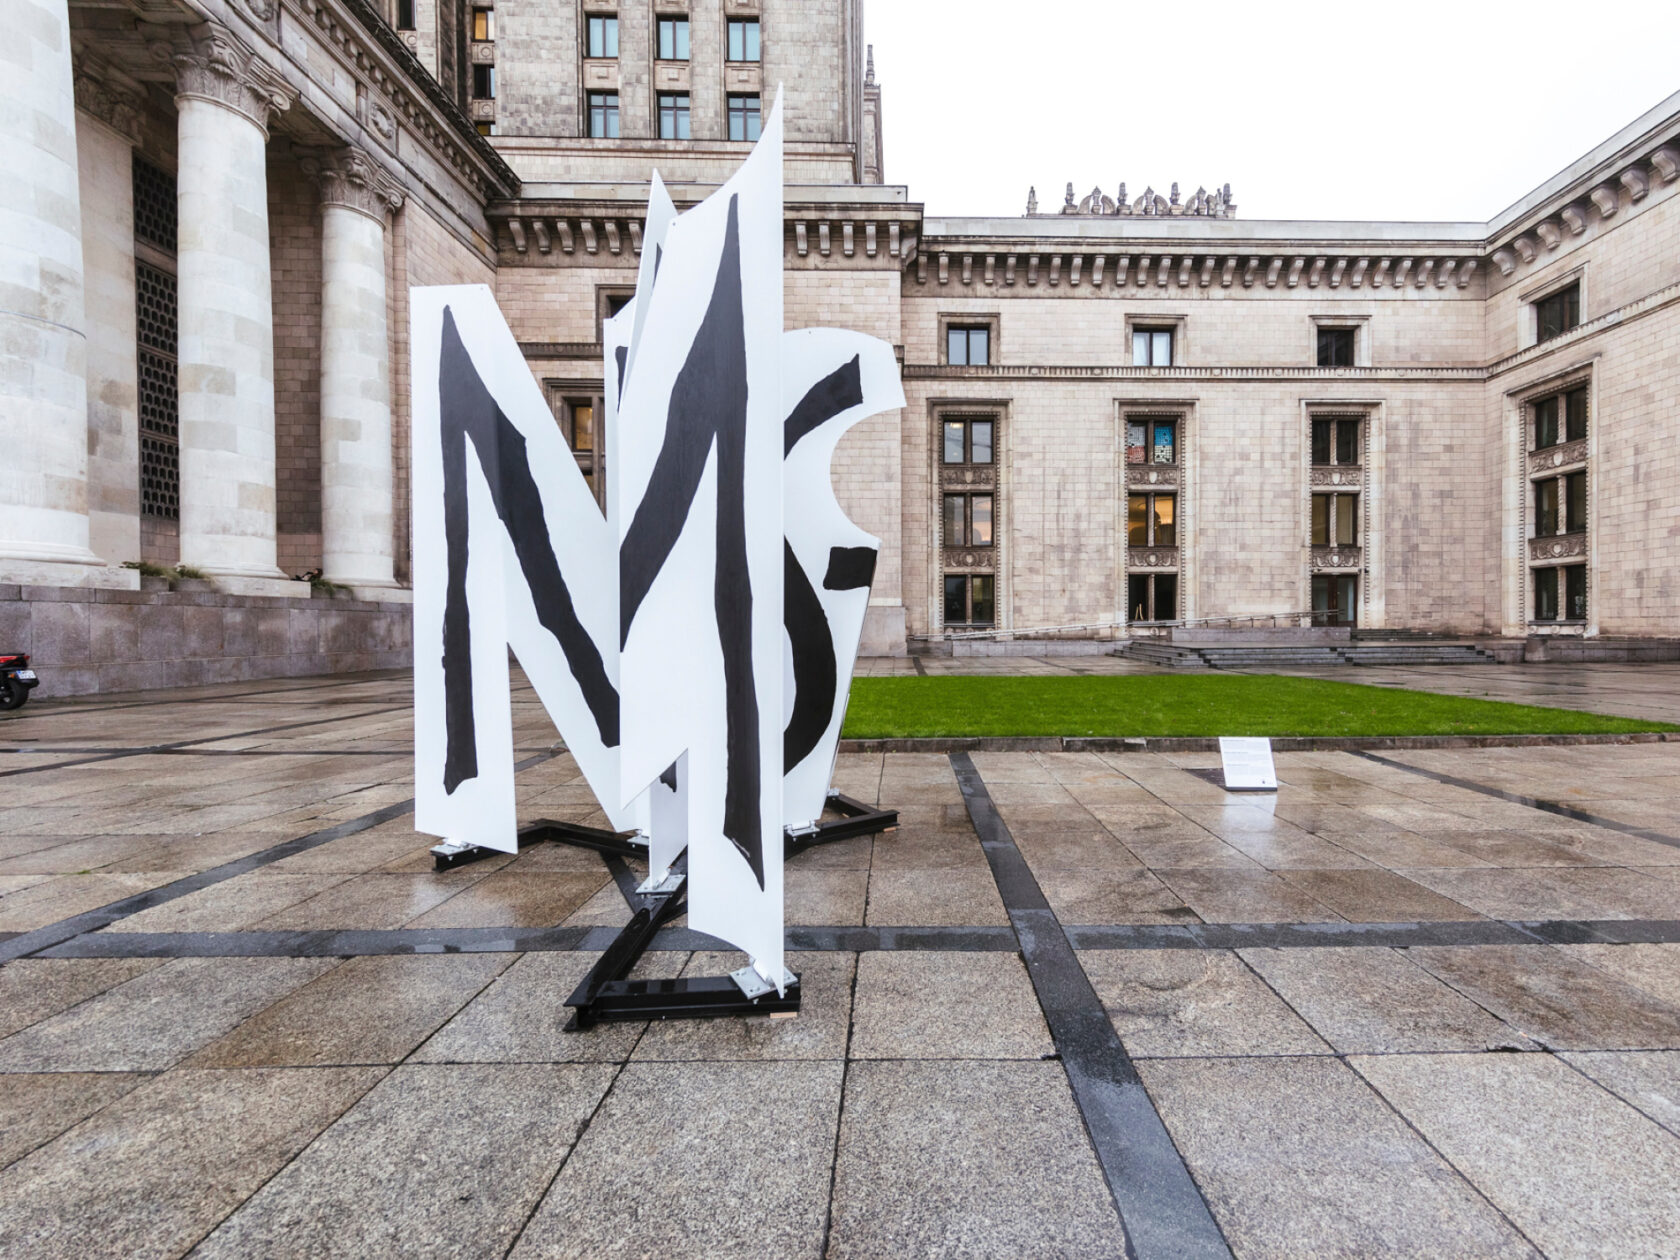 Pre-preview of “MSzN” sculpture